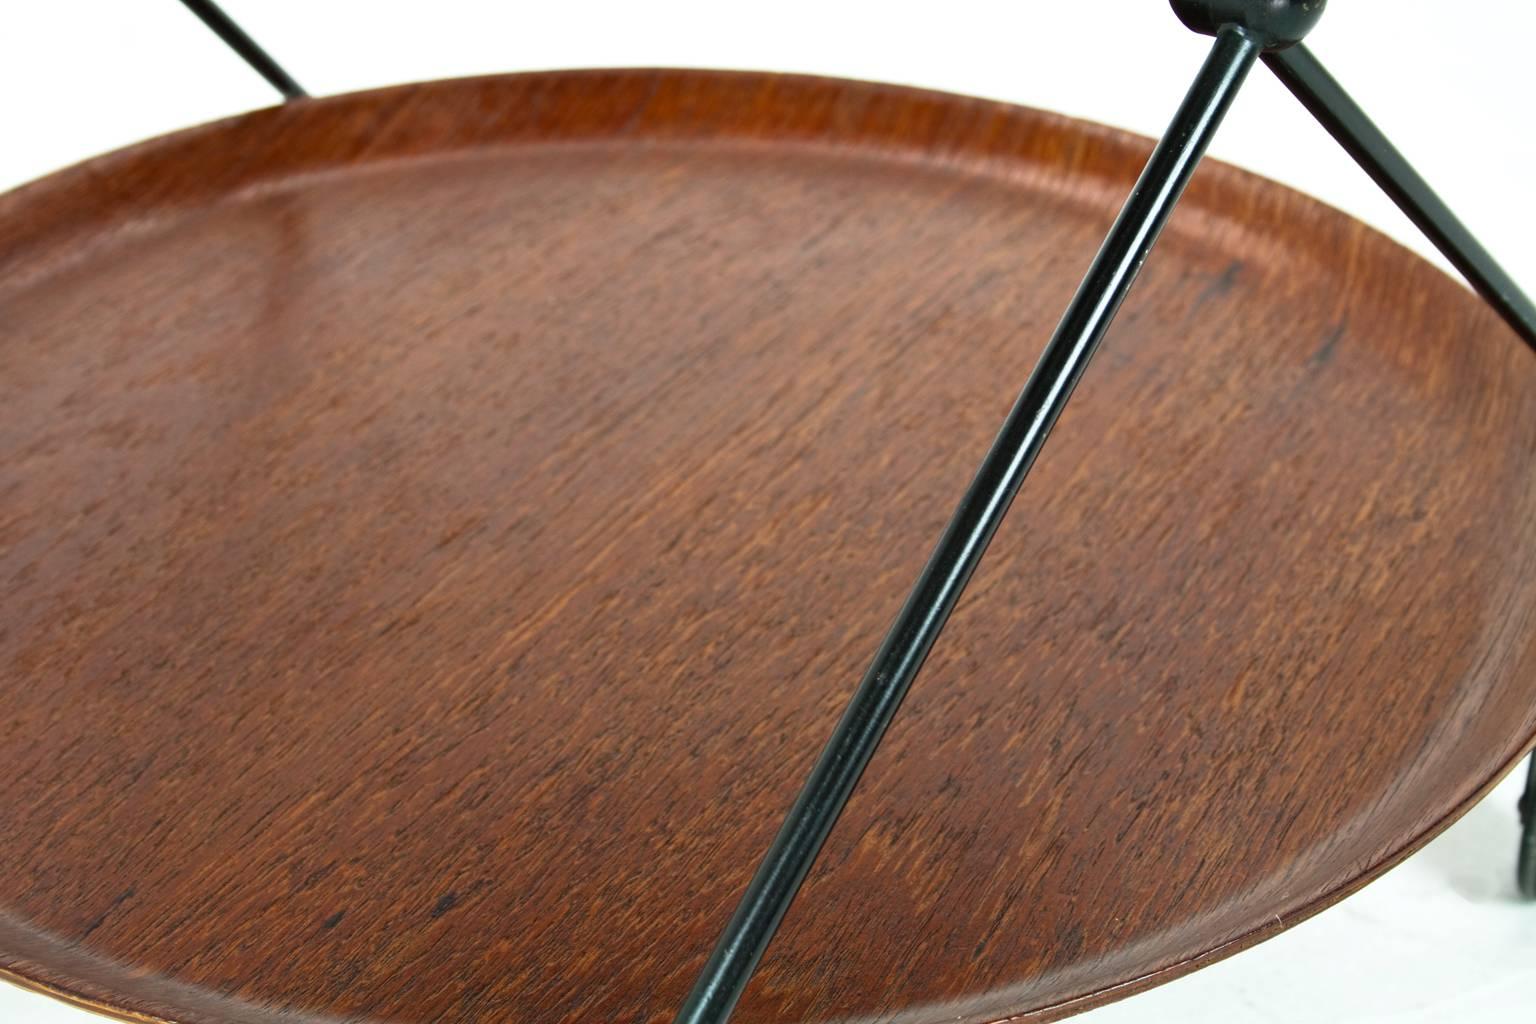 Iron 1950s Swedish Mid-Century Serving Table or Trolley in Teak and Lacquered Metal